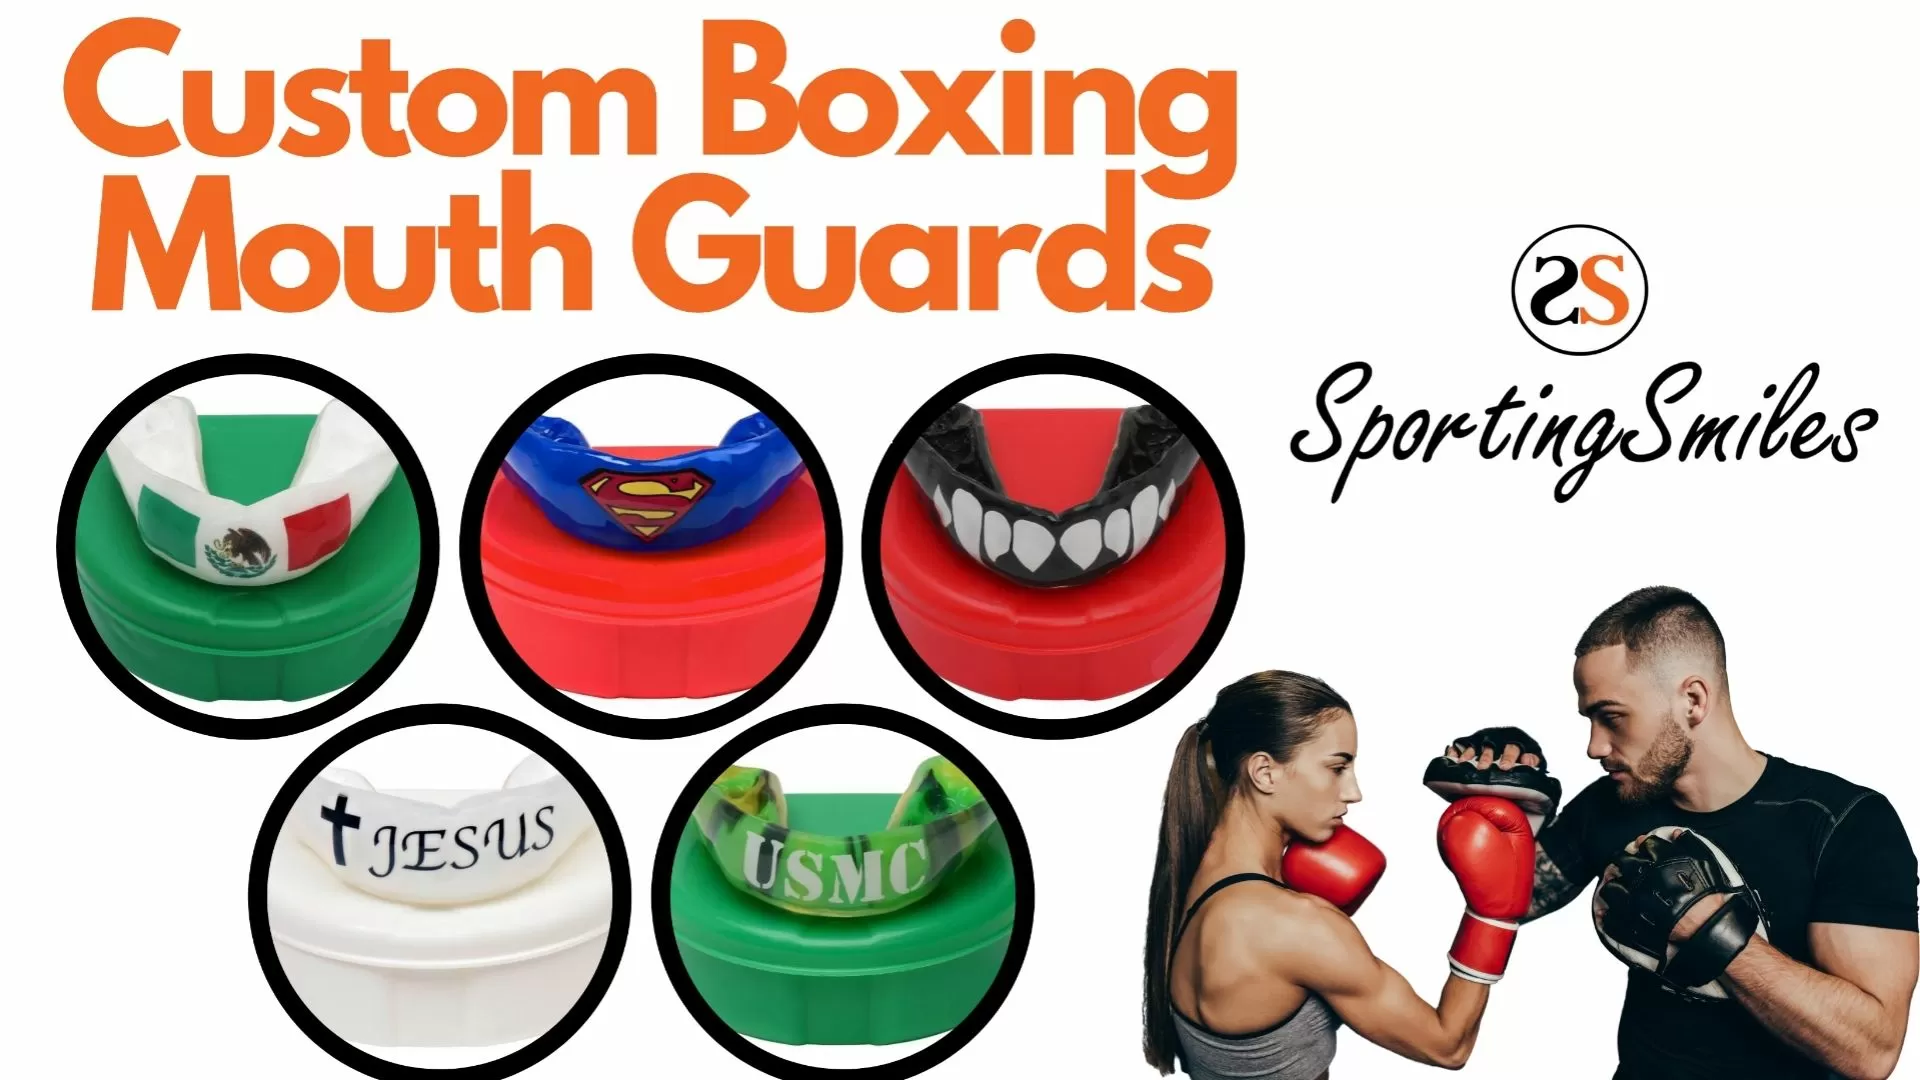 Custom Boxing Mouth guards at Sporting Smiles